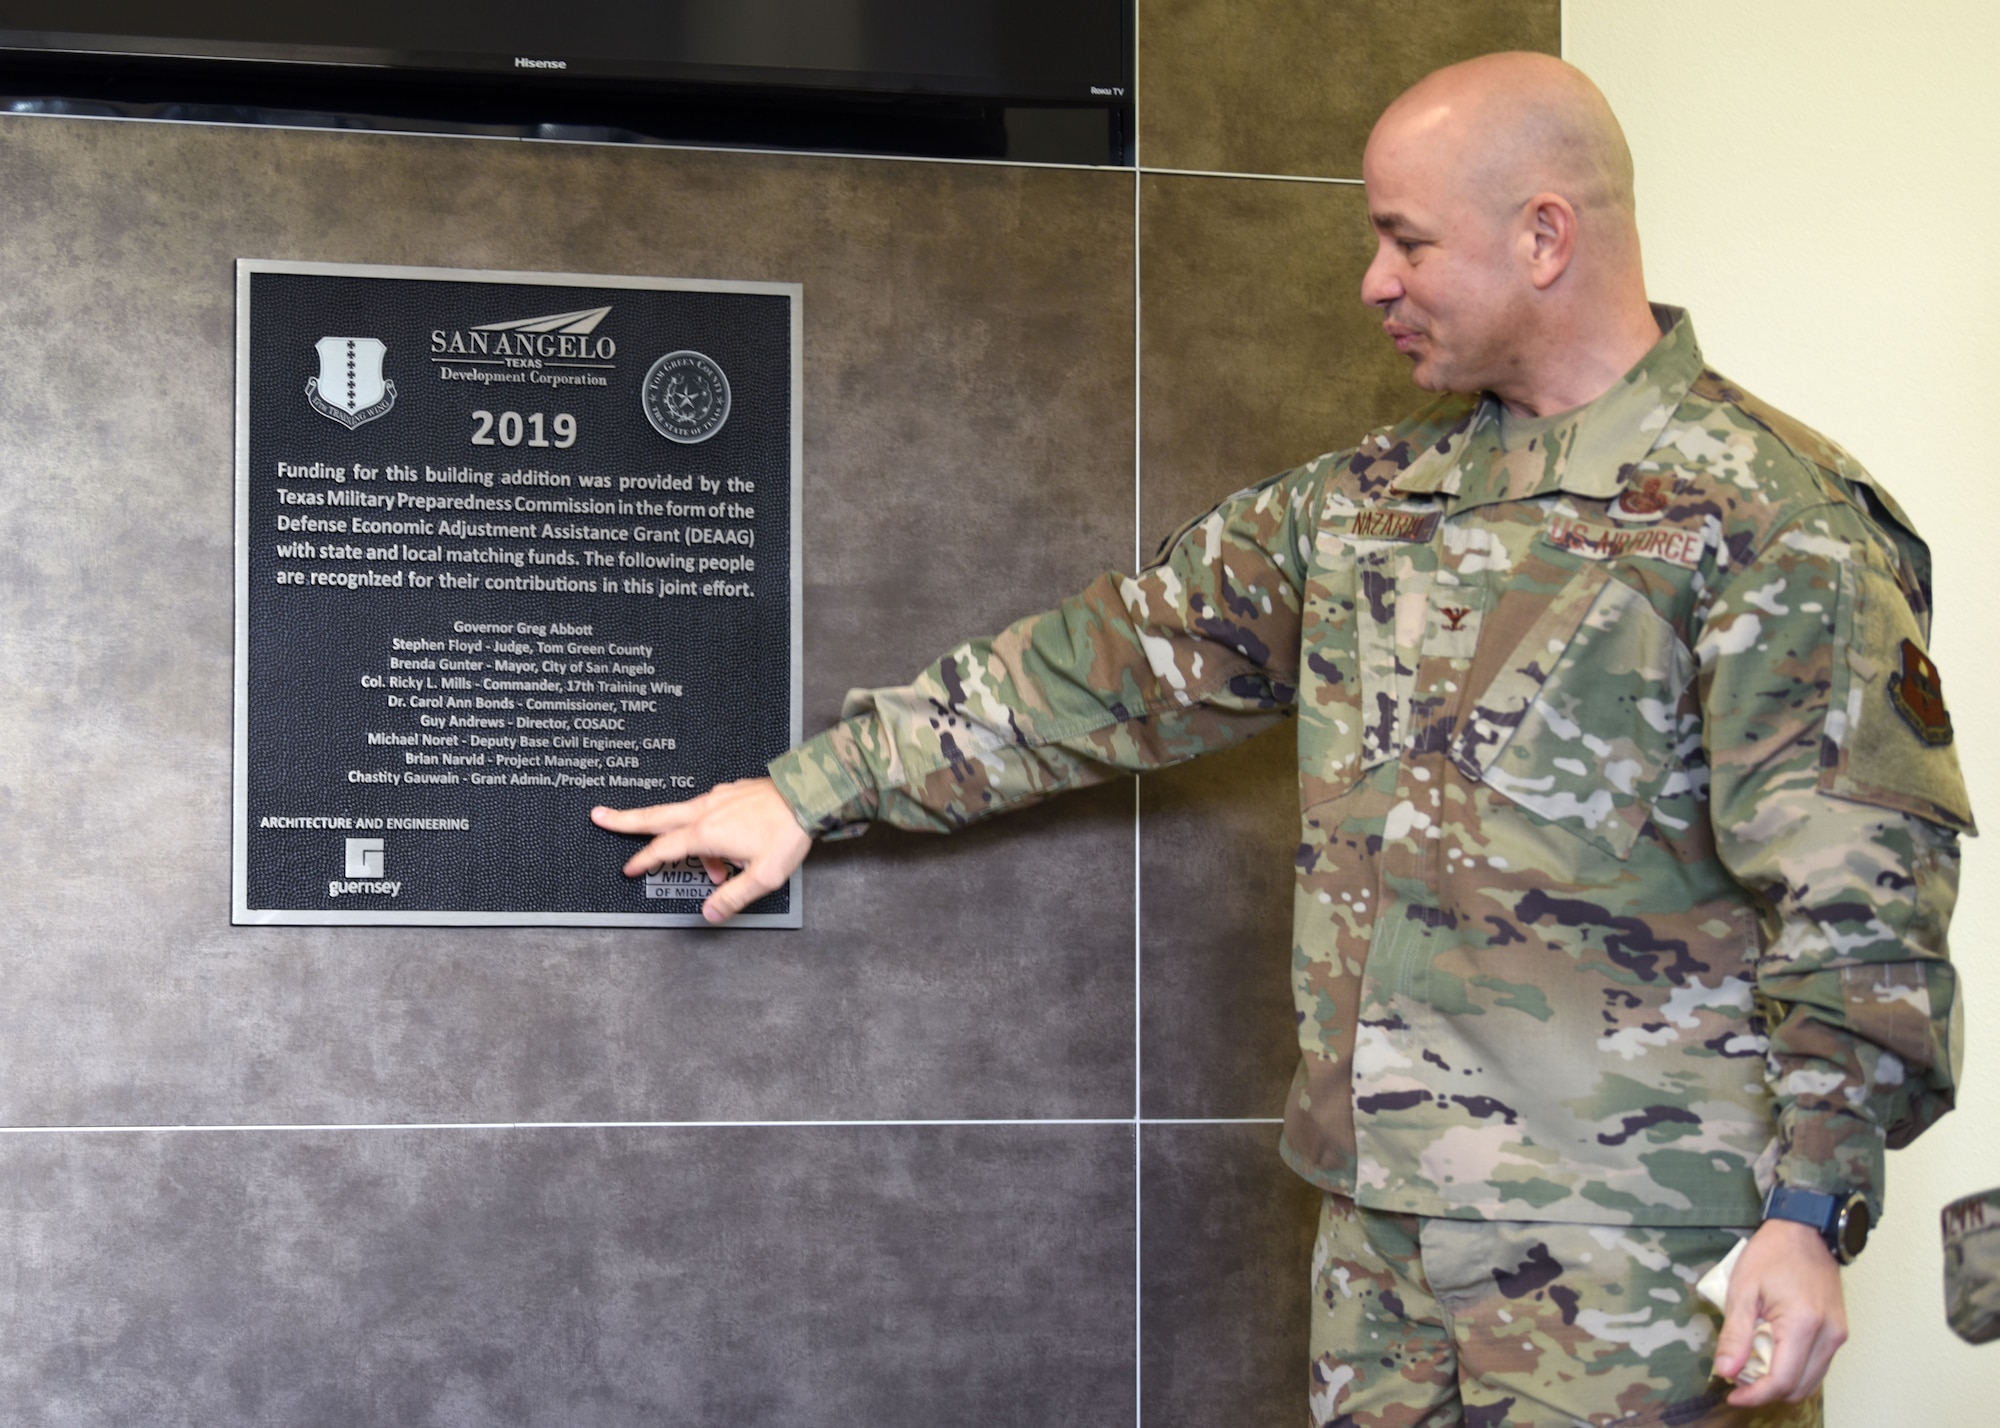 U.S. Air Force Col. Andres Nazario, 17th Training Wing commander, unveils a dedication plaque at the Cressman Dining Facility on Goodfellow Air Force Base, January 6, 2020. The plaque listed the names of the individuals who helped create the new multi-purpose facility. (U.S. Air Force photo by Airman 1st Class Ethan Sherwood)